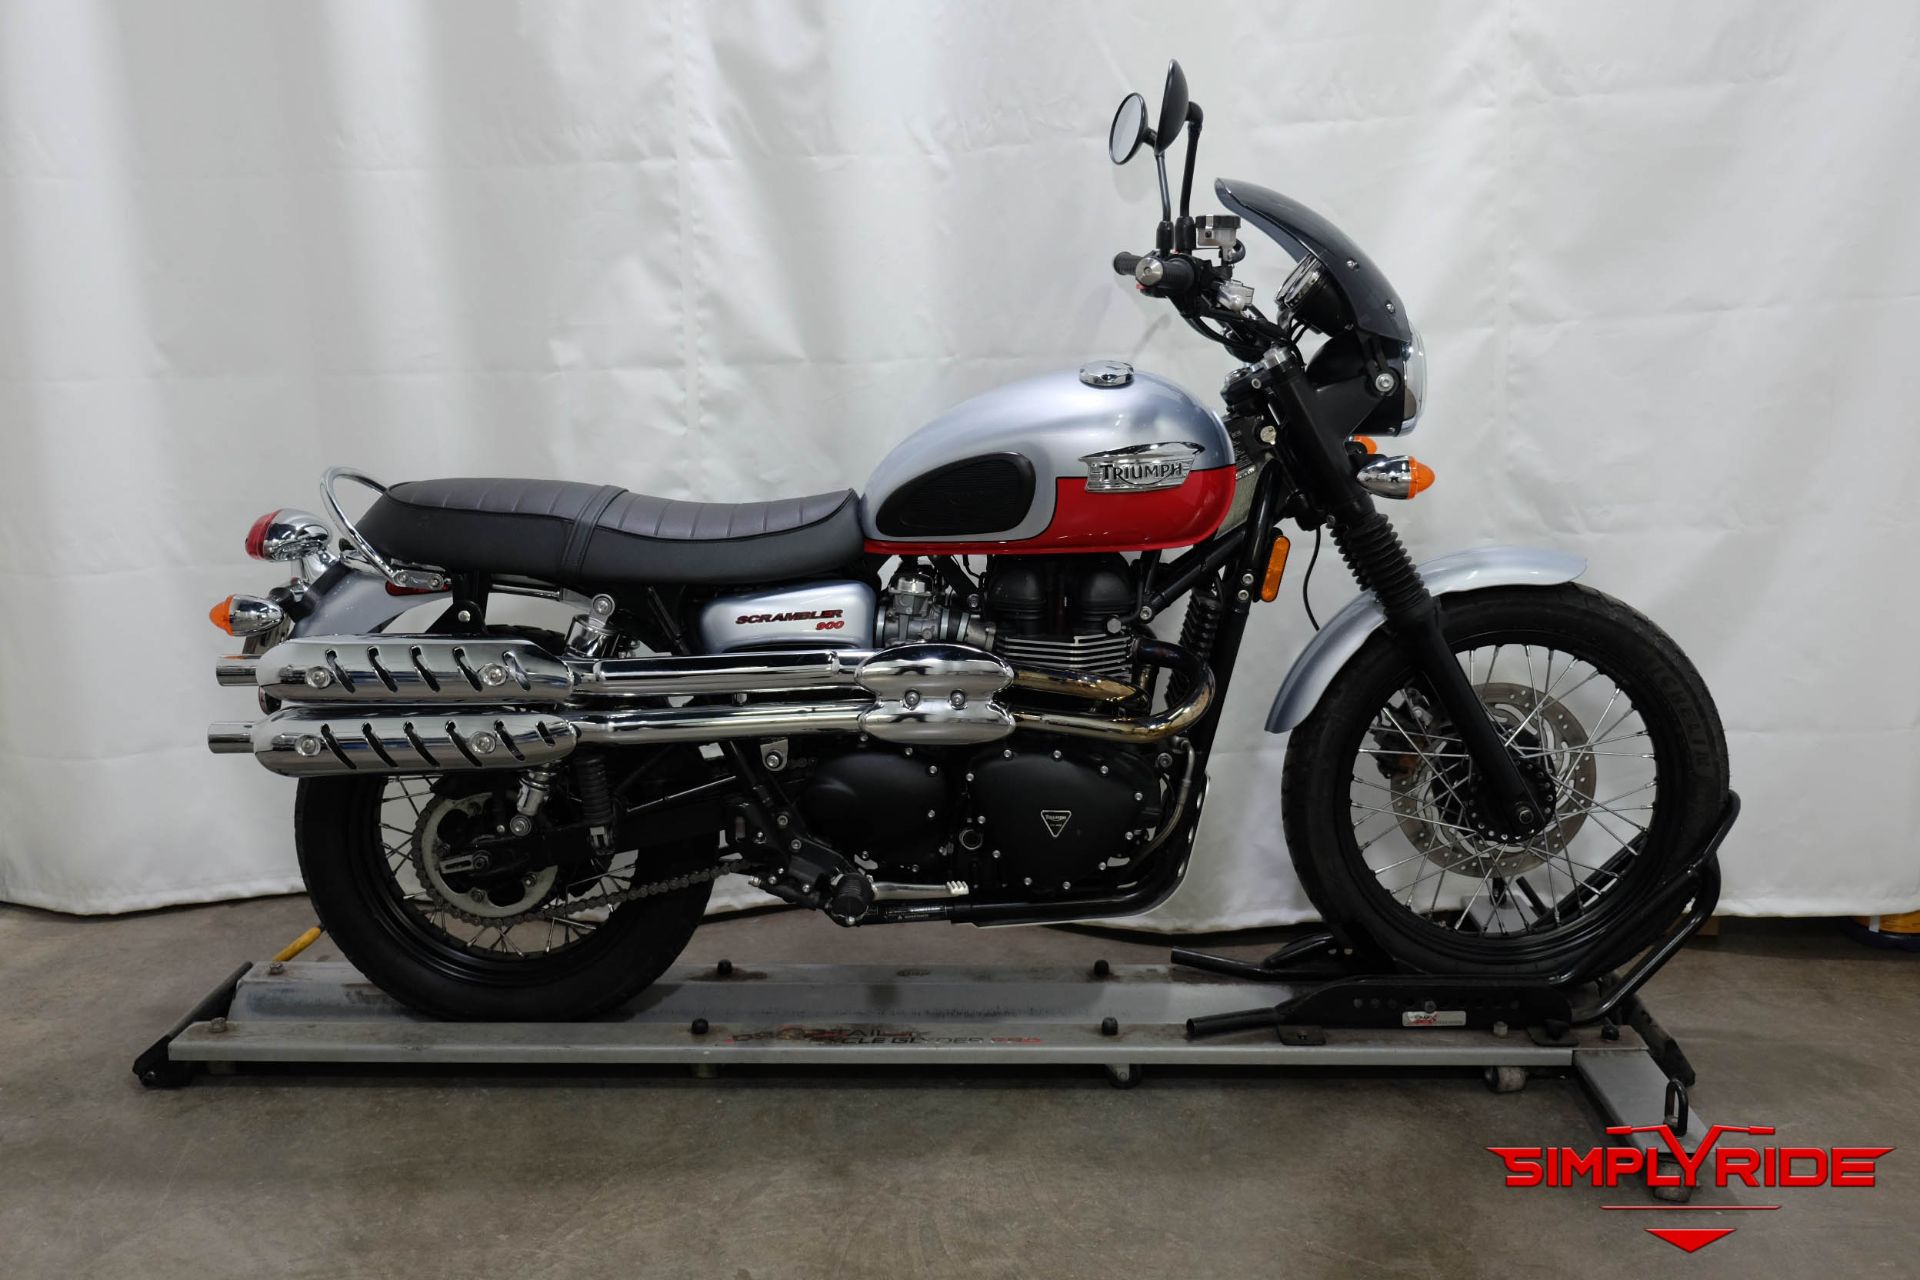 14 Triumph Scrambler Used Motorcycle For Sale Eden Prairie Mn Simply Ride